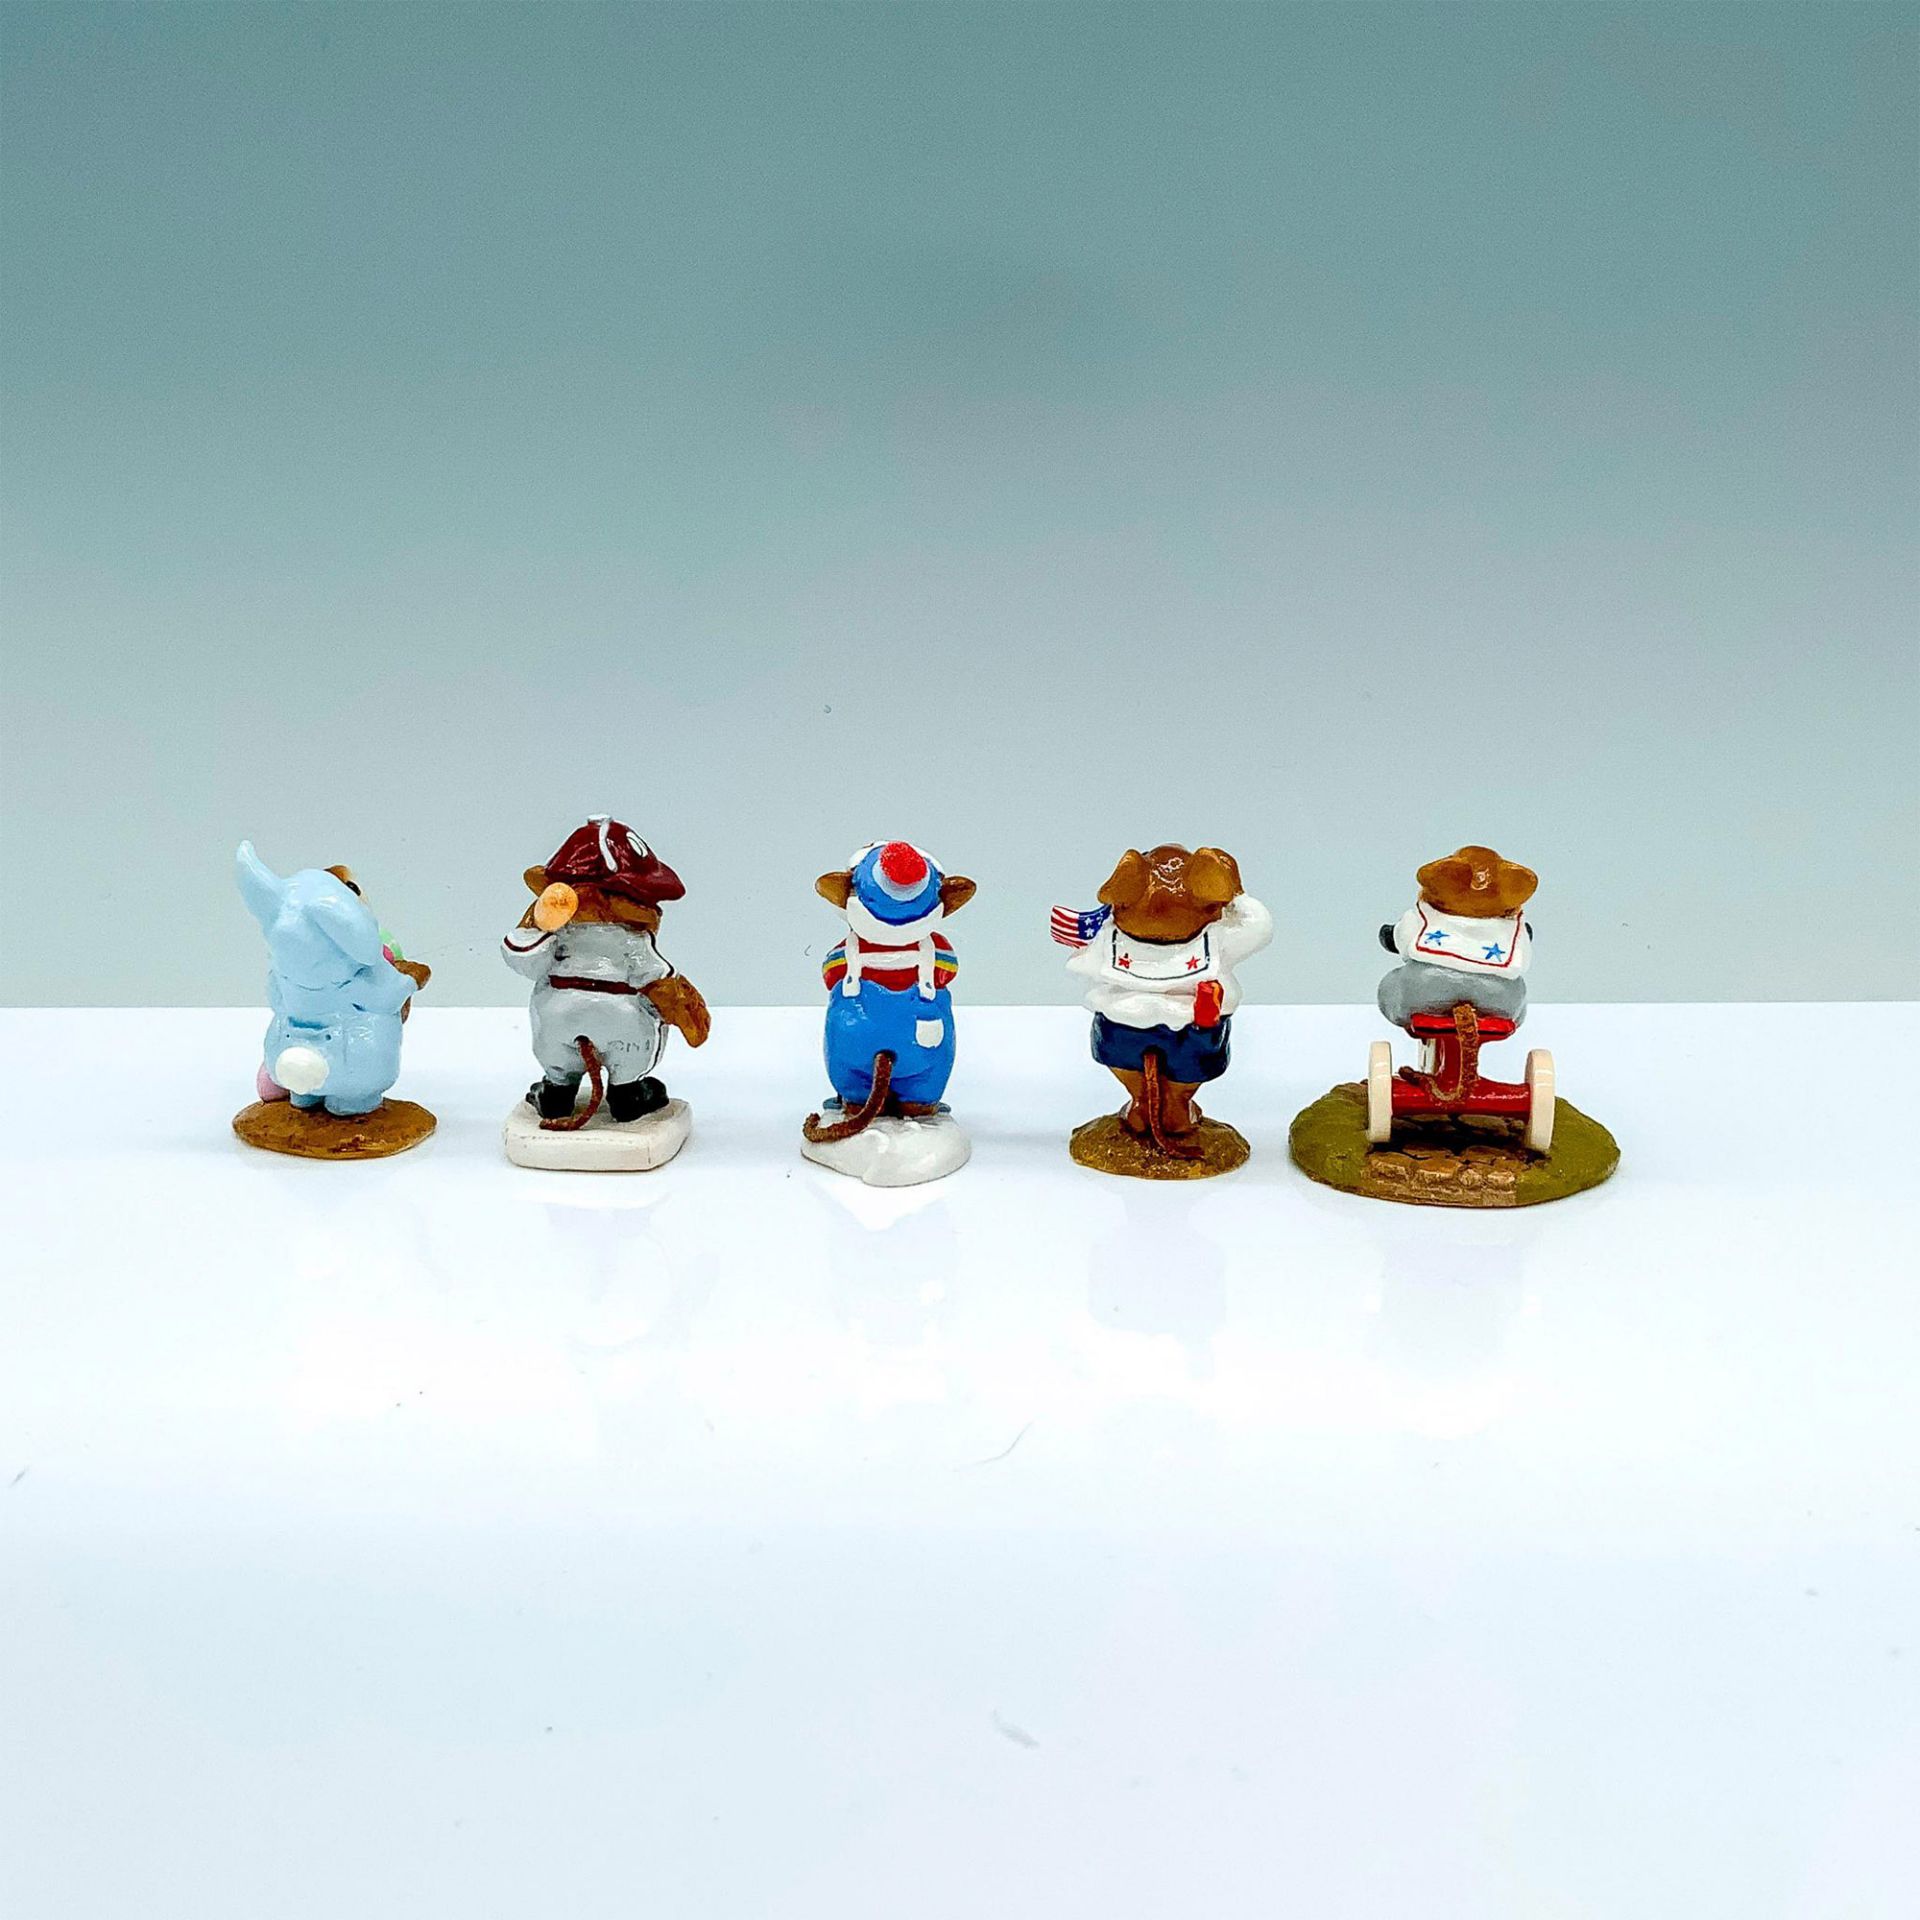 5pc Annette Petersen Miniature Figurines, Wee Forest Folk - Image 2 of 3